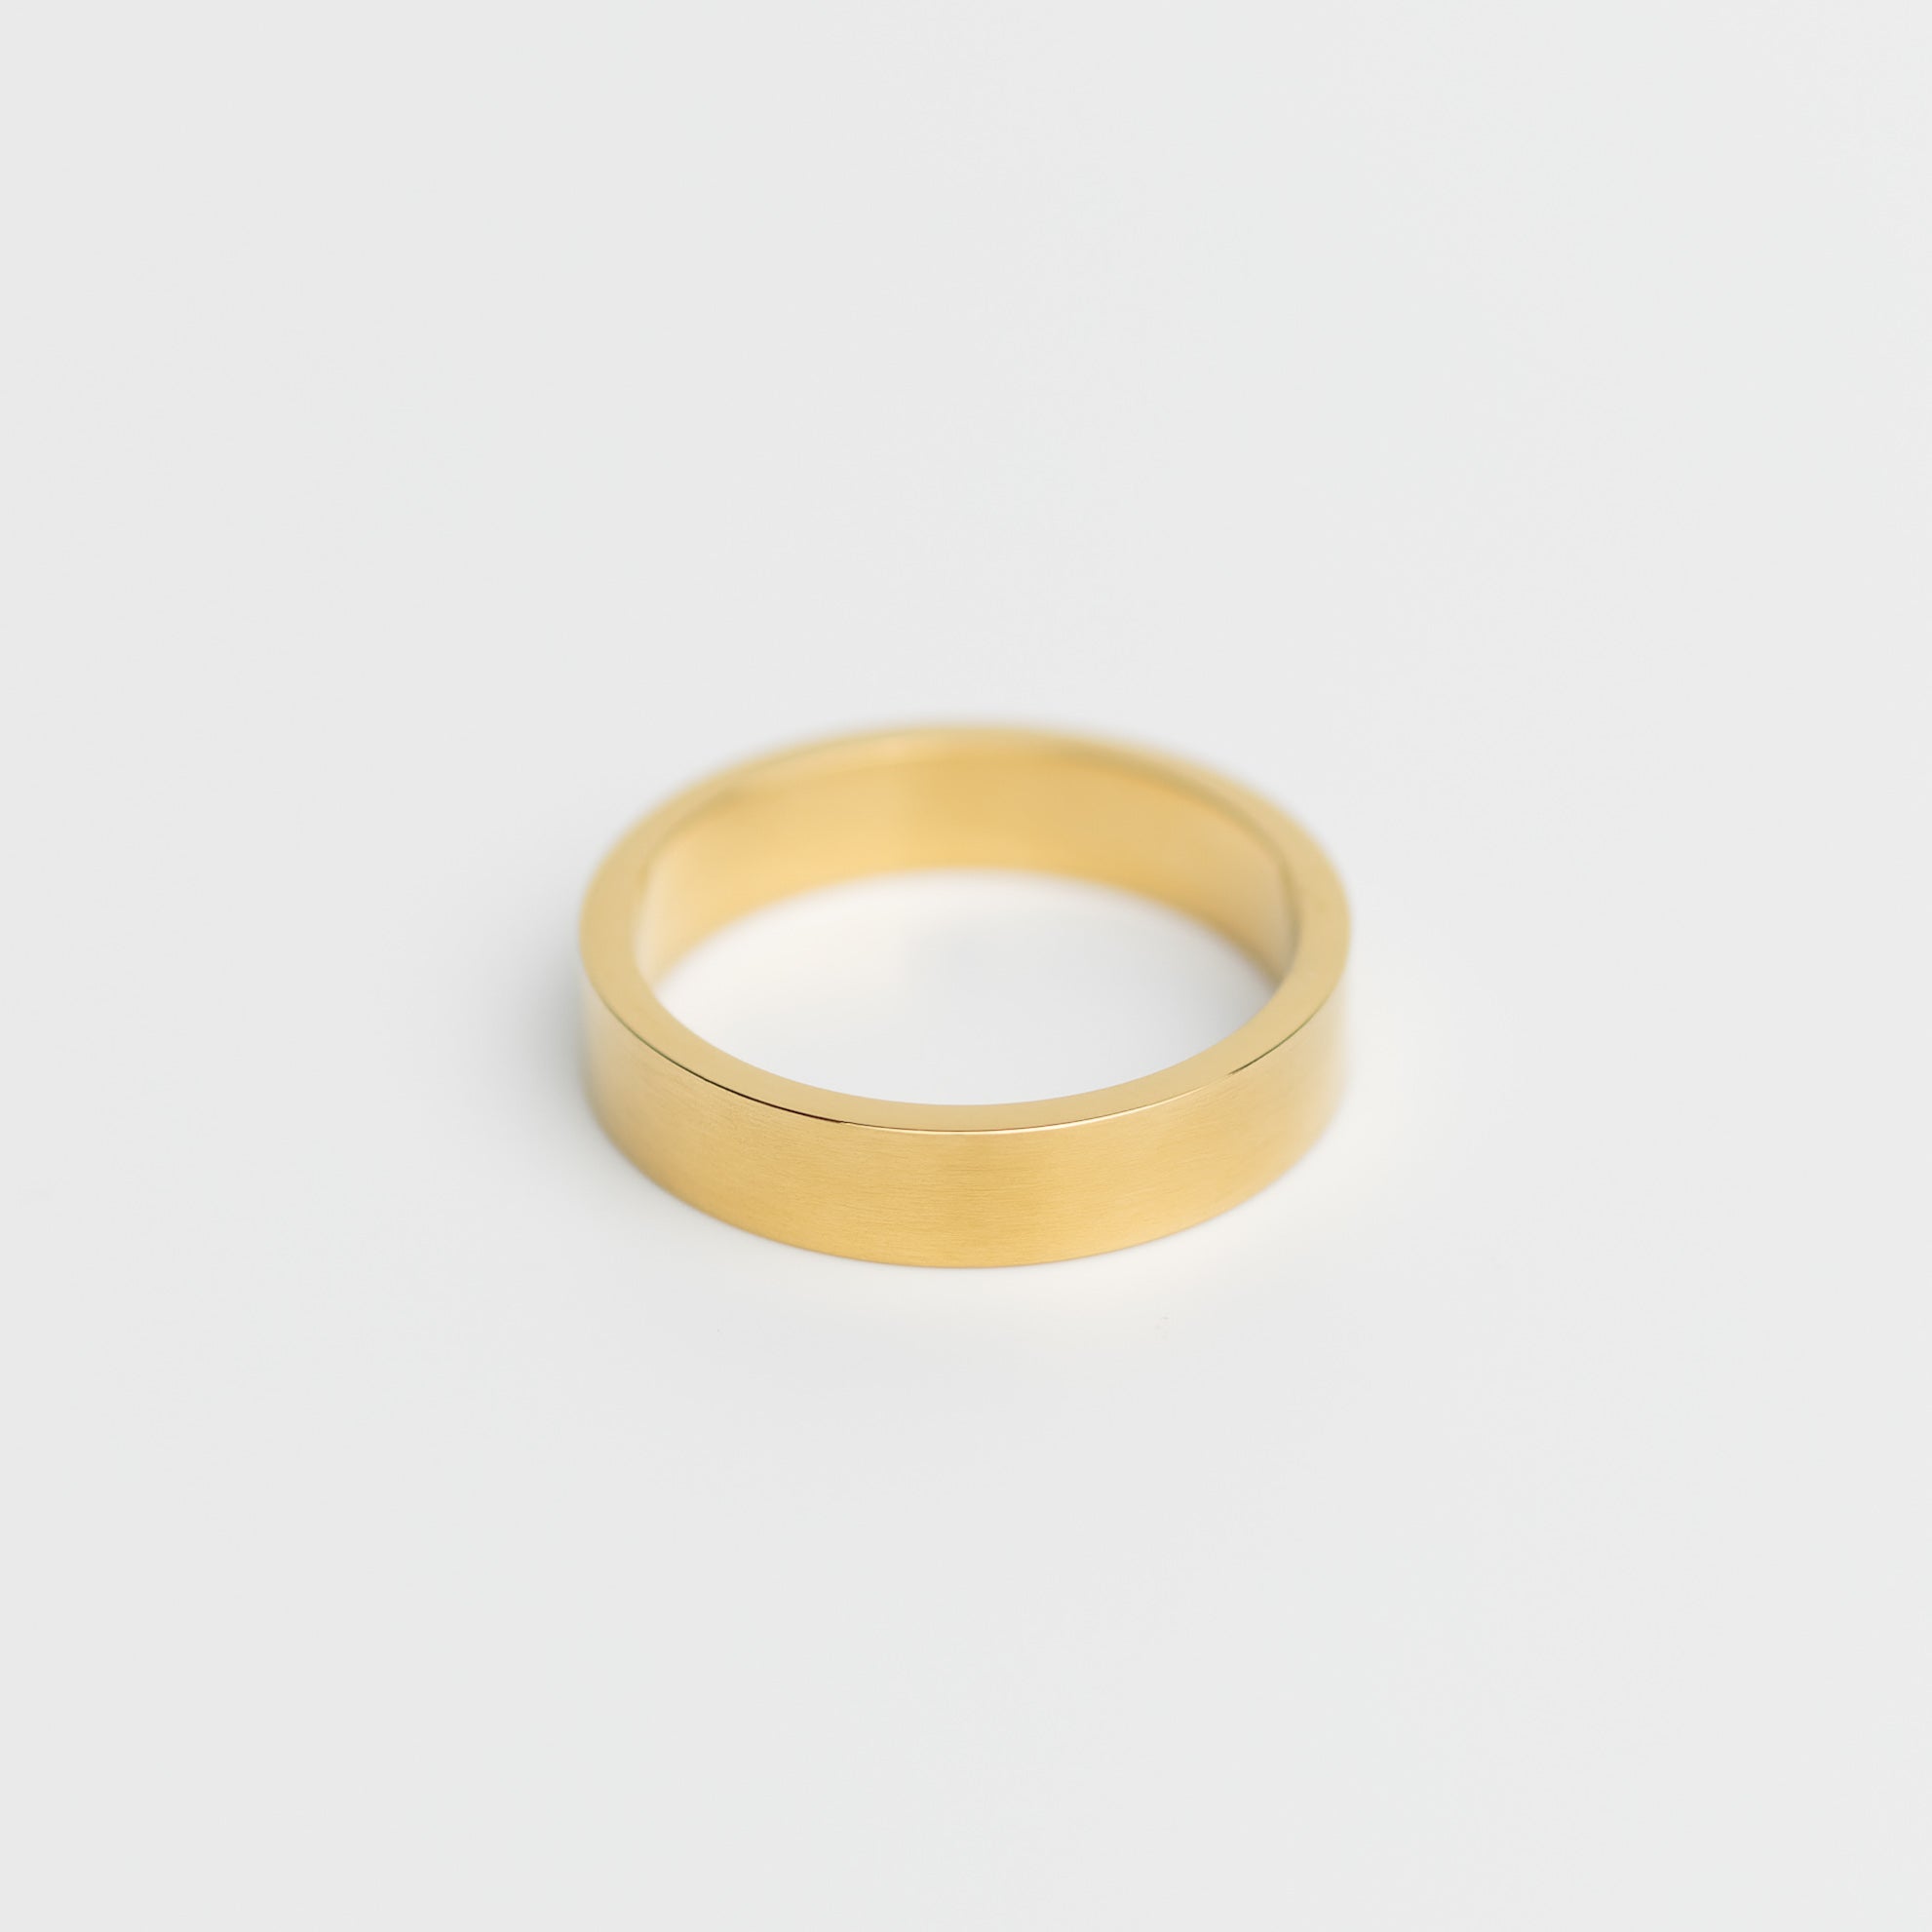 Rº5 - Stainless Steel 18K gold plated ring - Zafeer